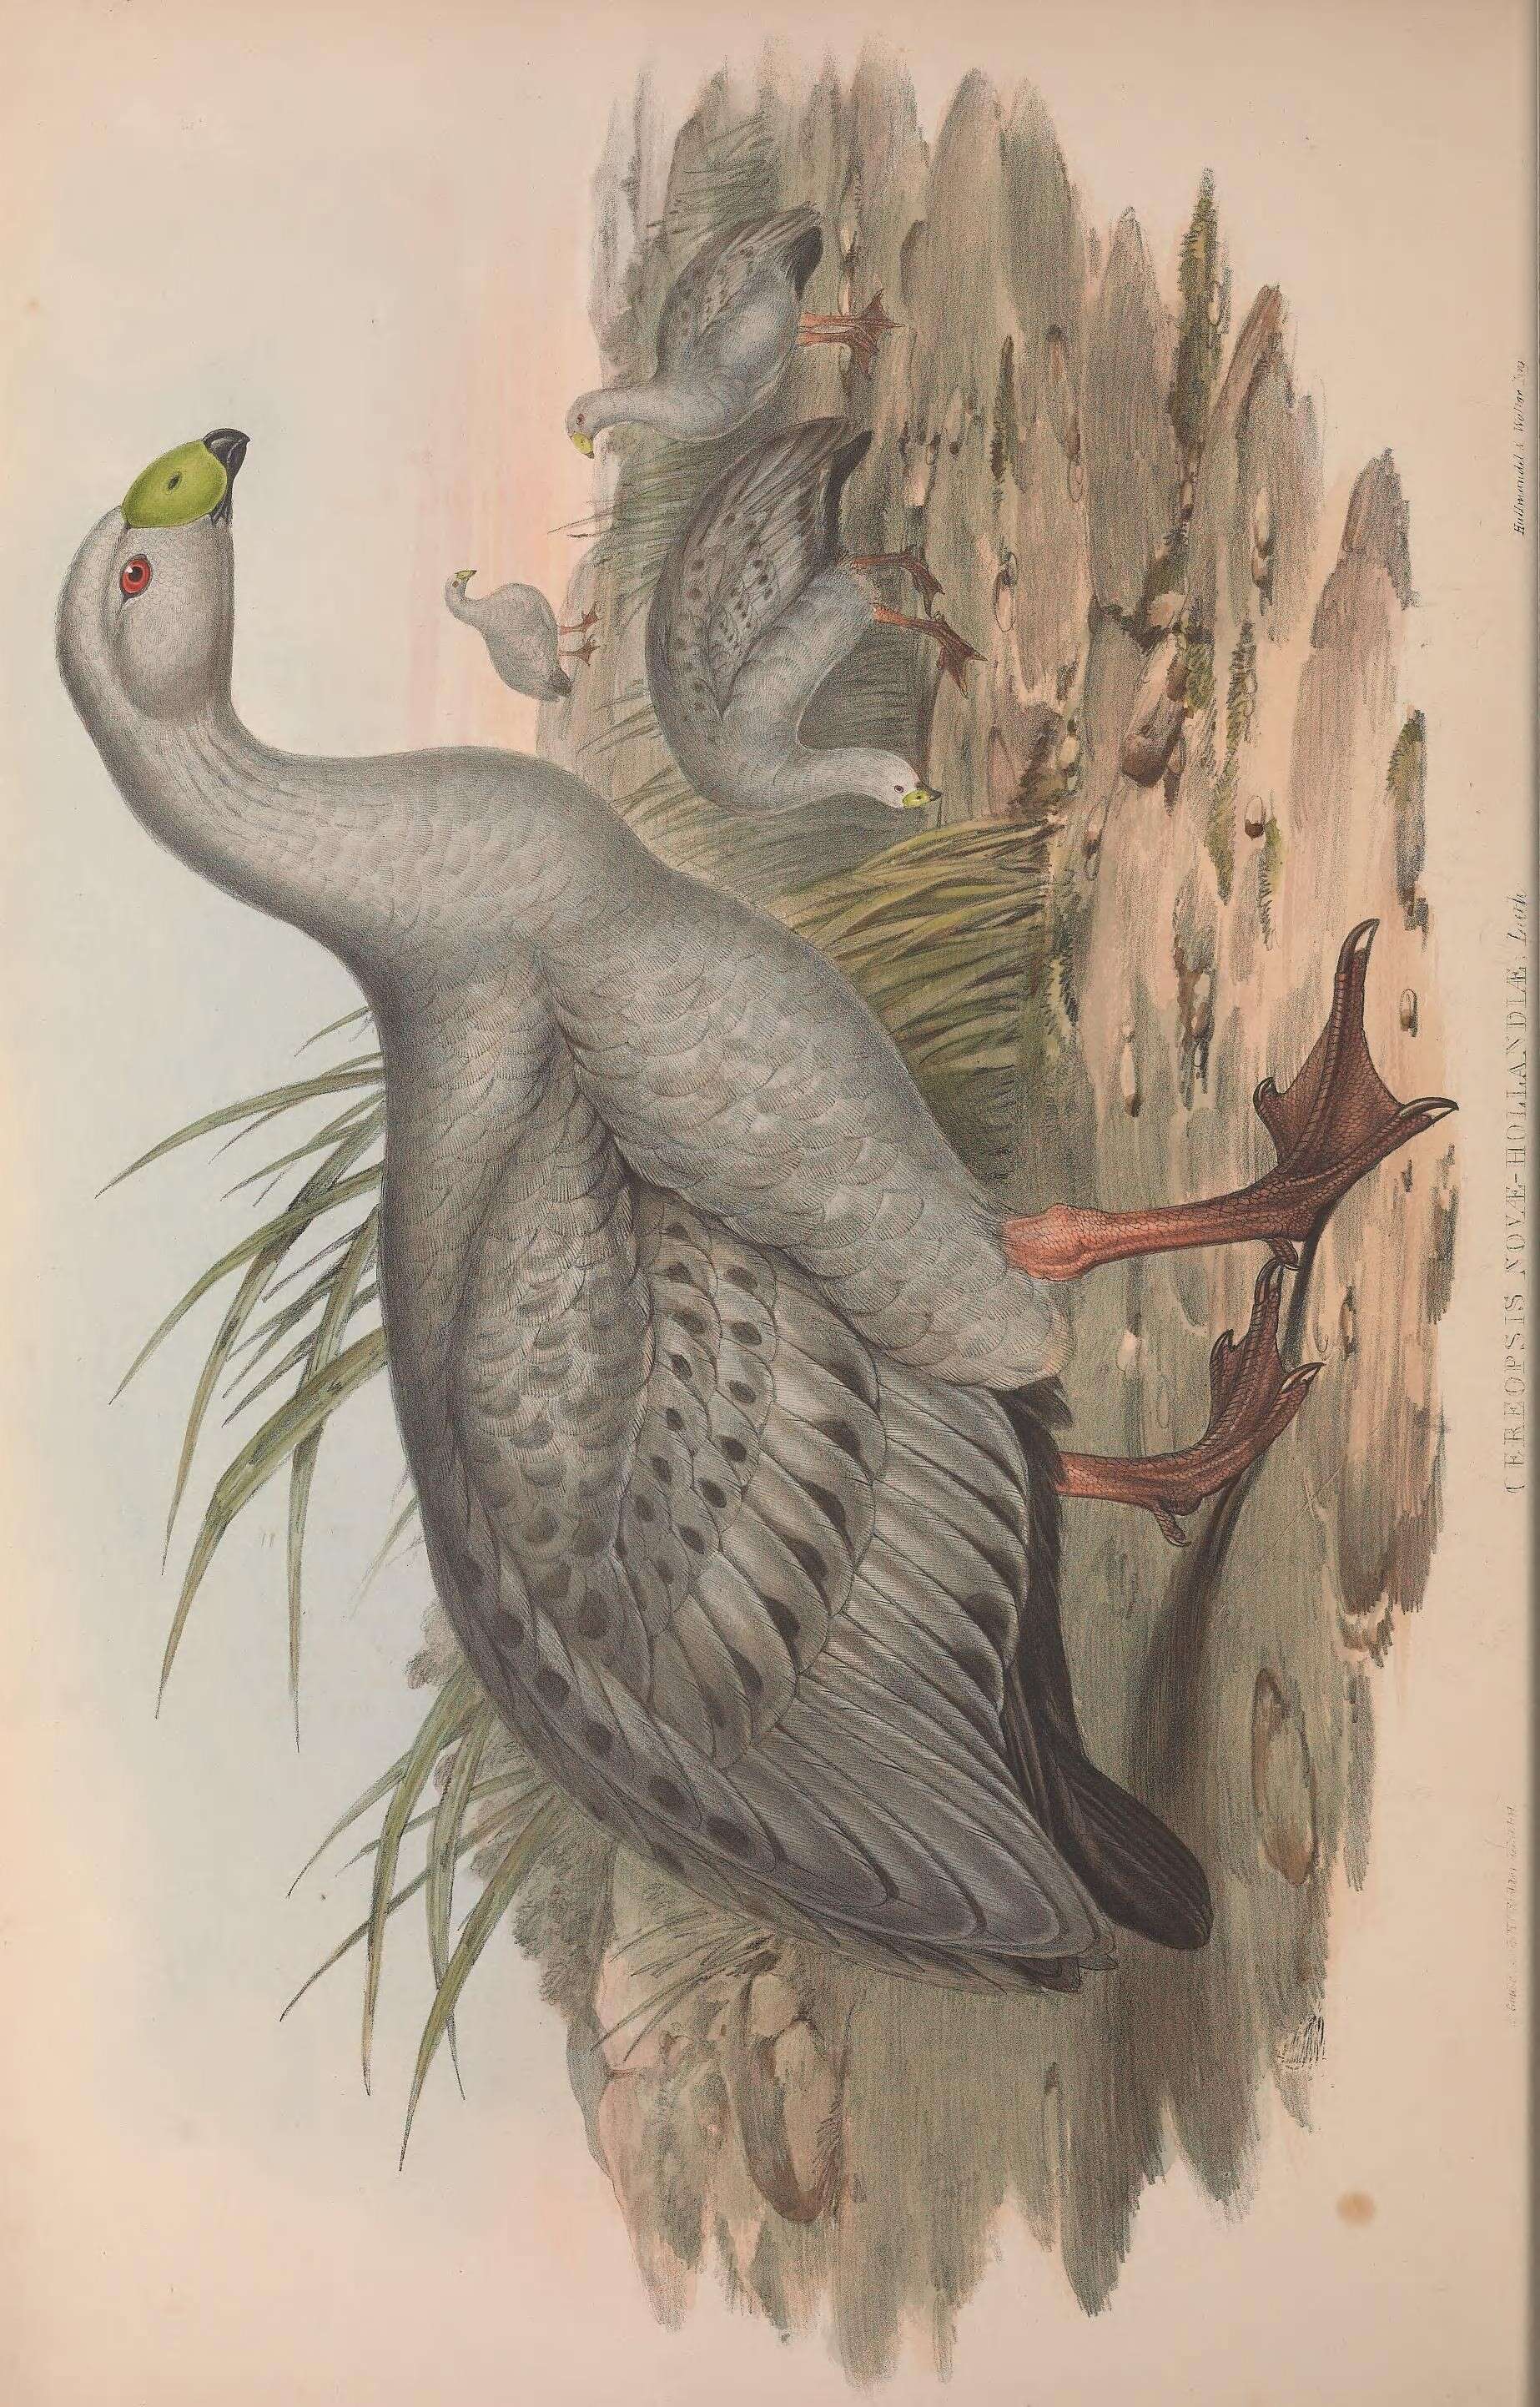 Image of Cereopsis Latham 1801